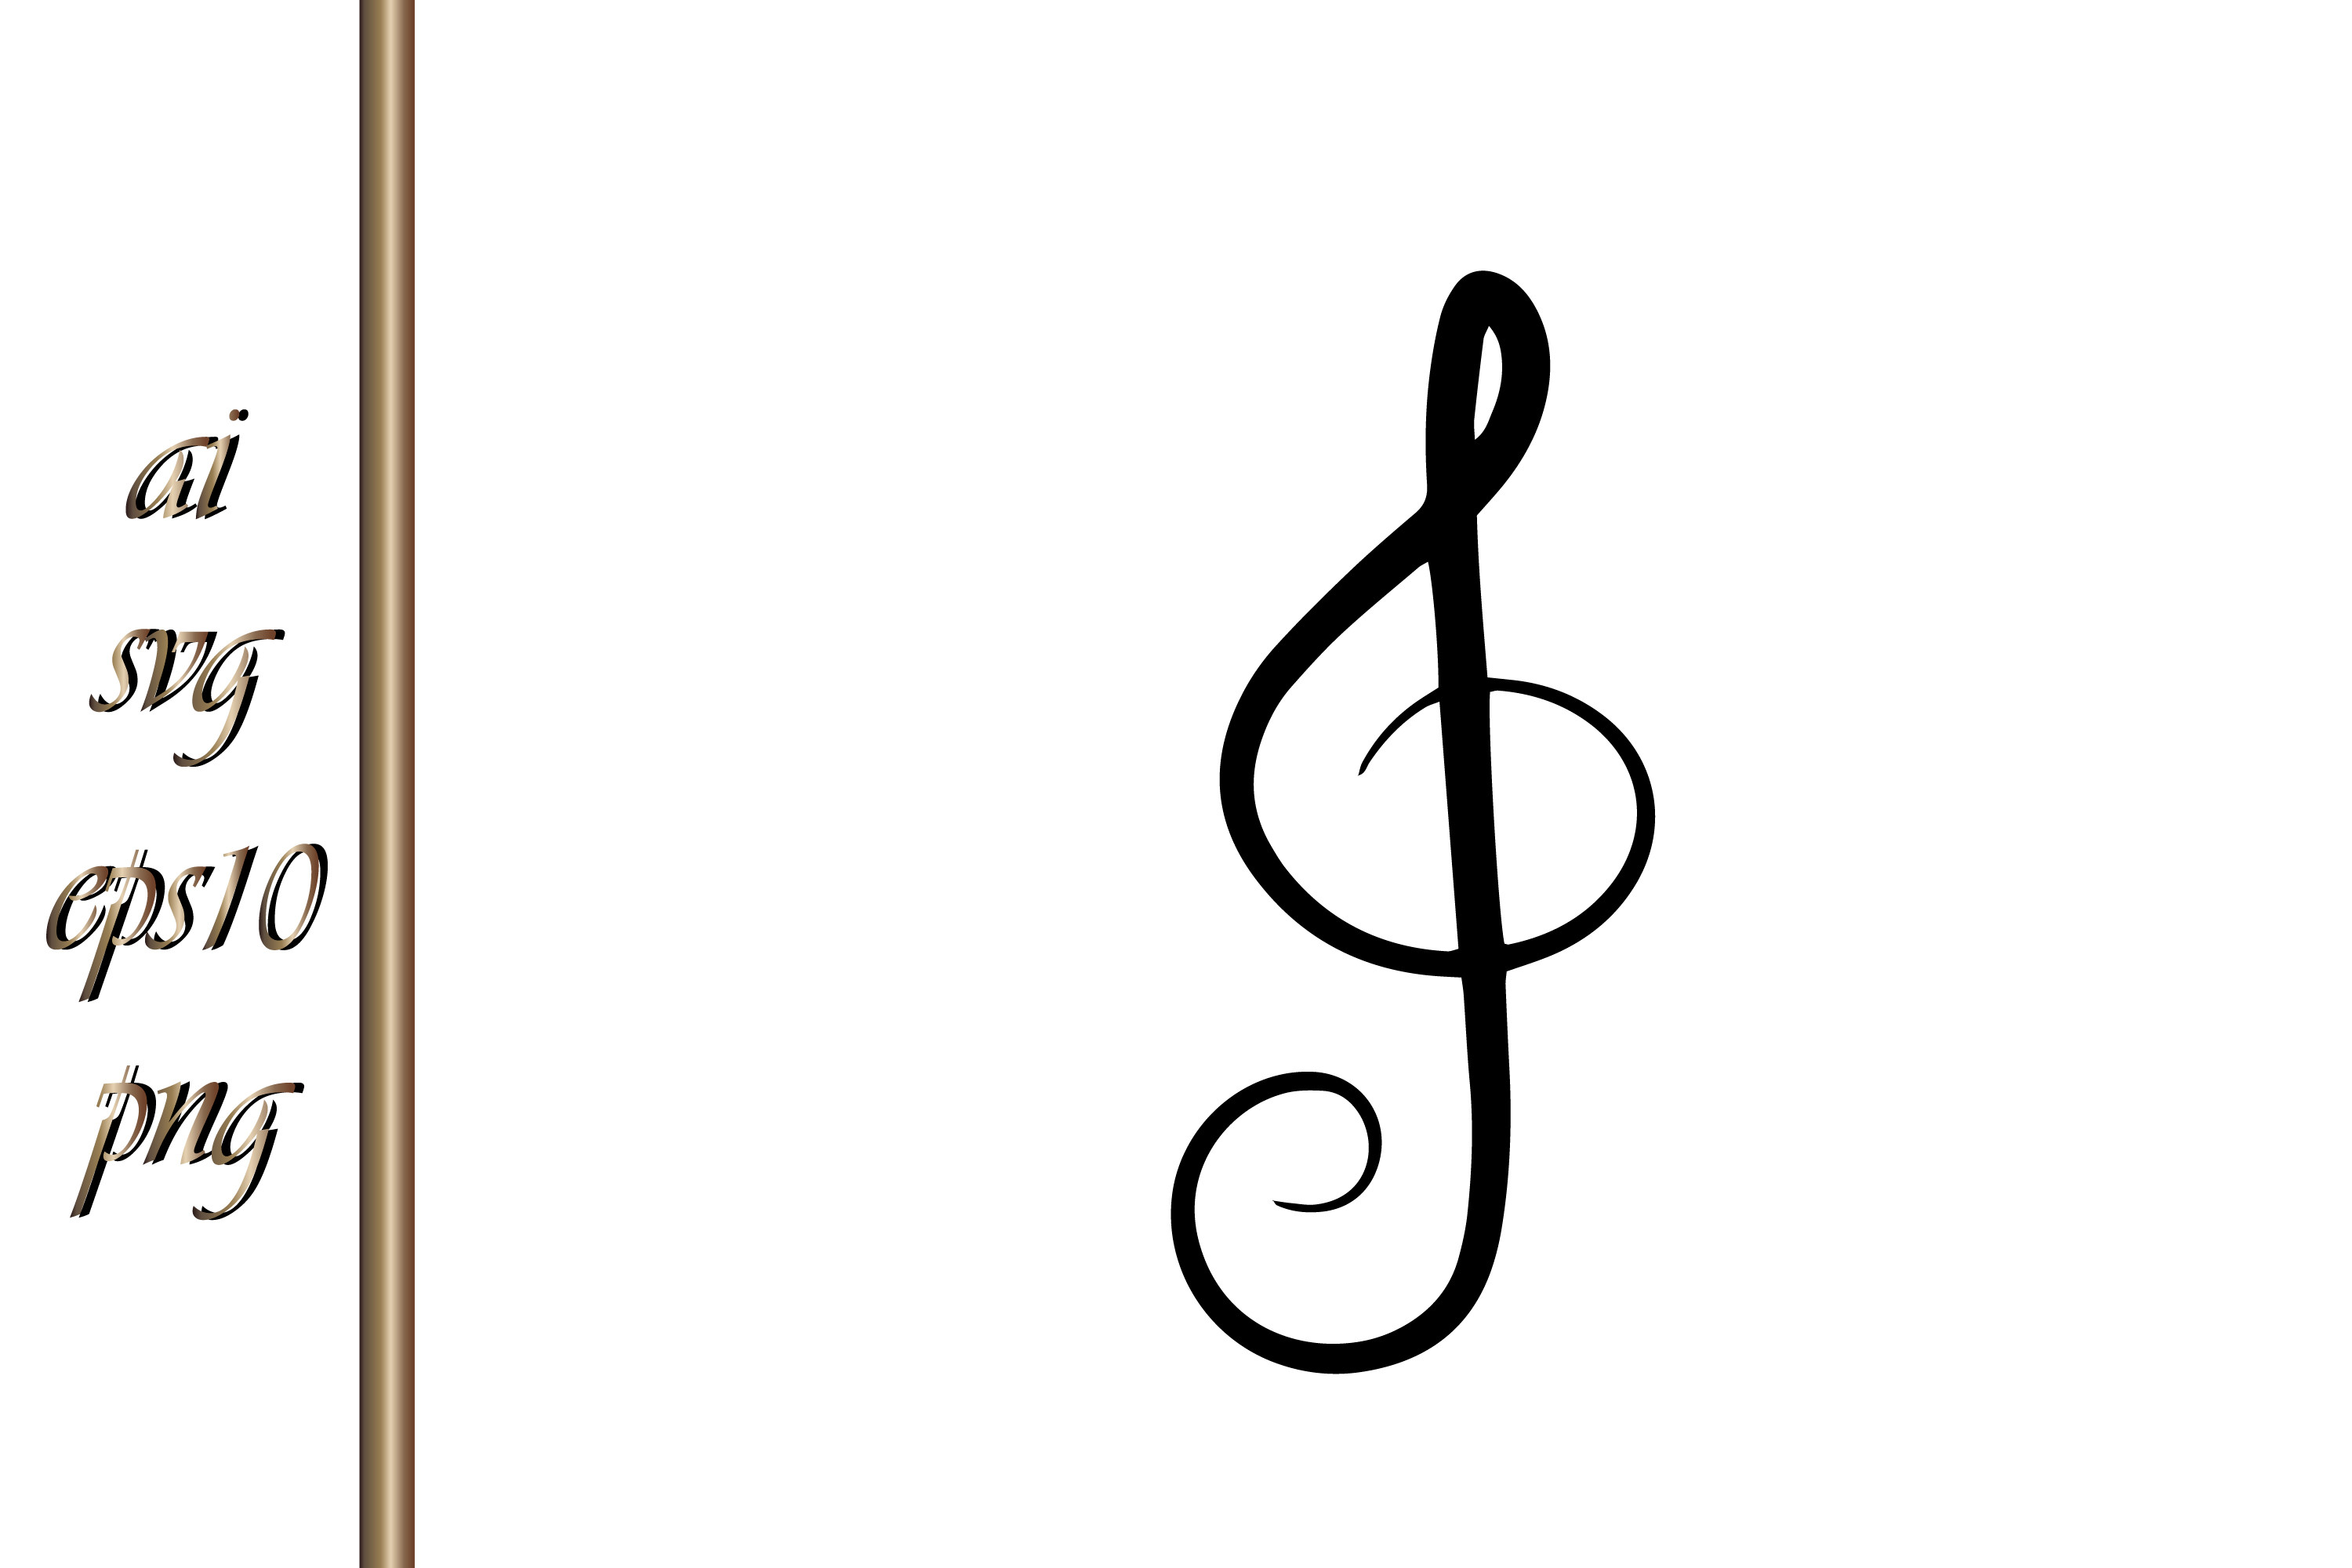 Outline Treble Clef Music Doodle Sketch Graphic by IrynaShancheva ...